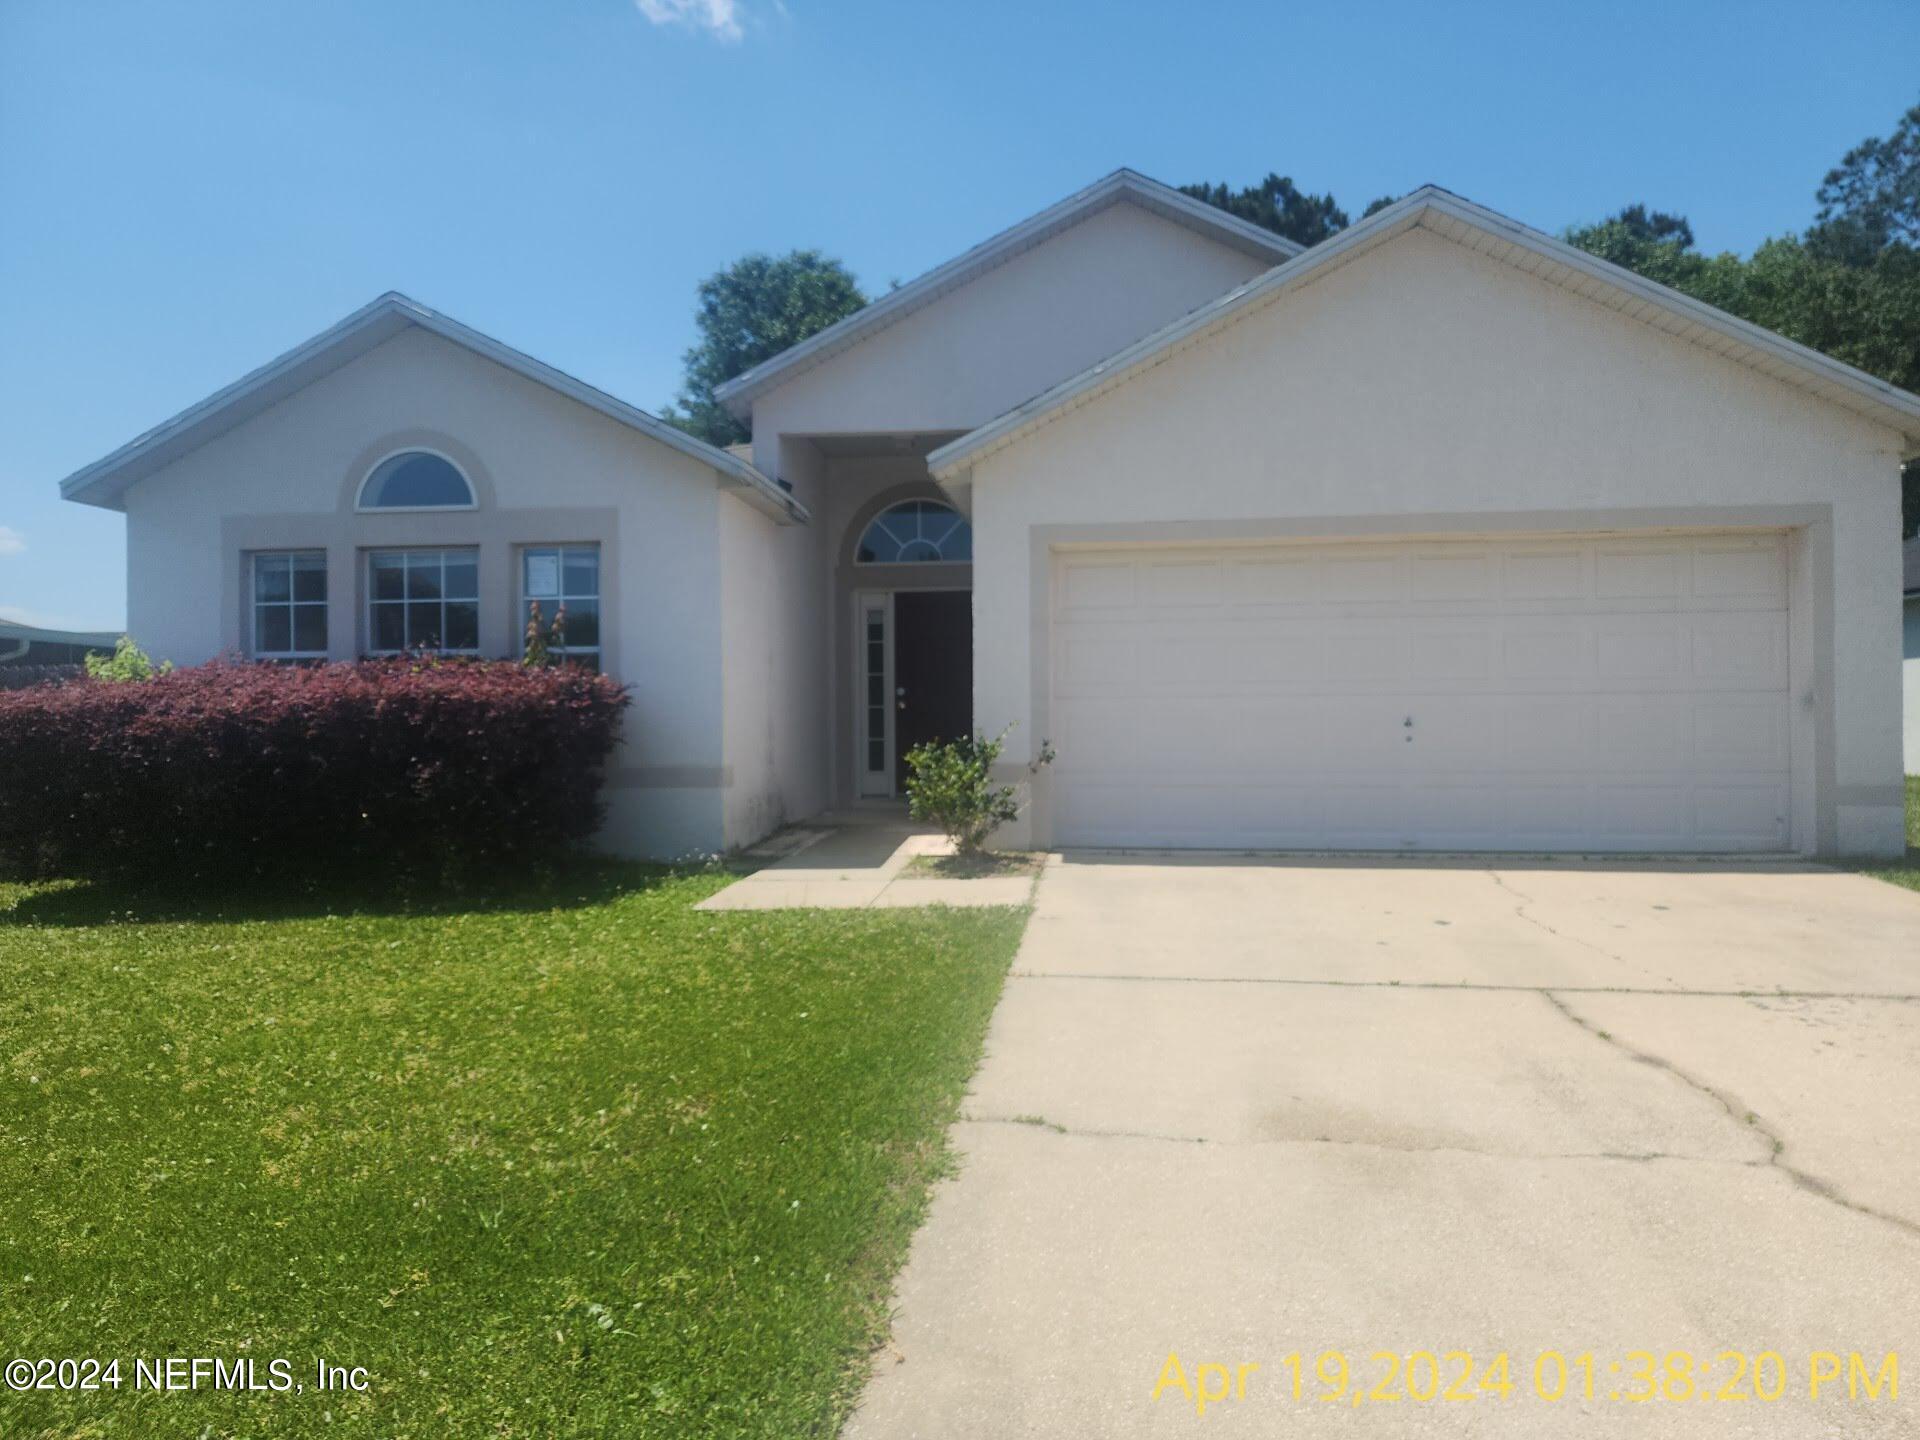 Middleburg, FL home for sale located at 3548 Talisman Drive, Middleburg, FL 32068